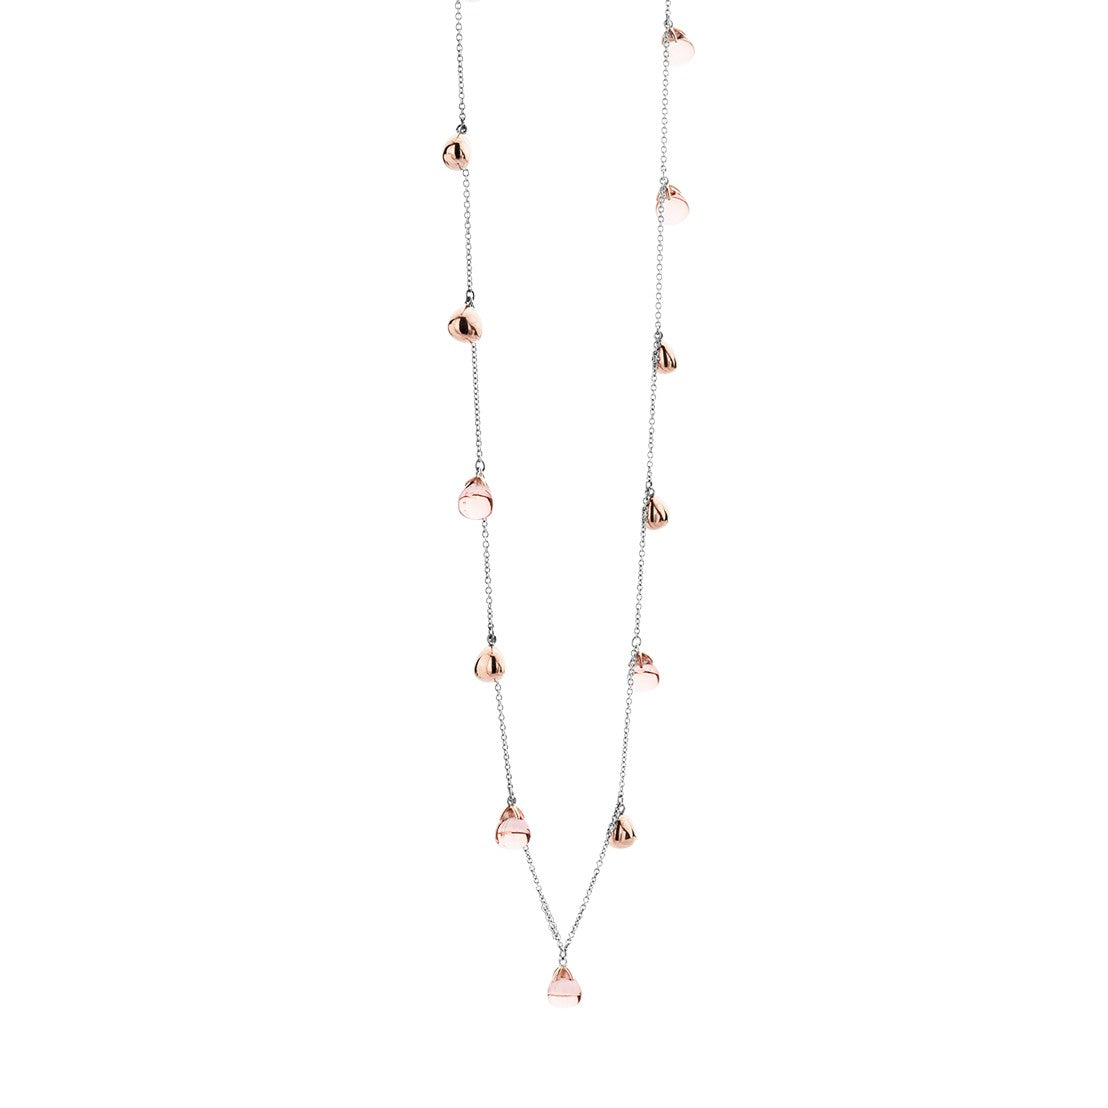 TI SENTO Sterling Silver Necklace with Pink and Rose Teardrop Charms